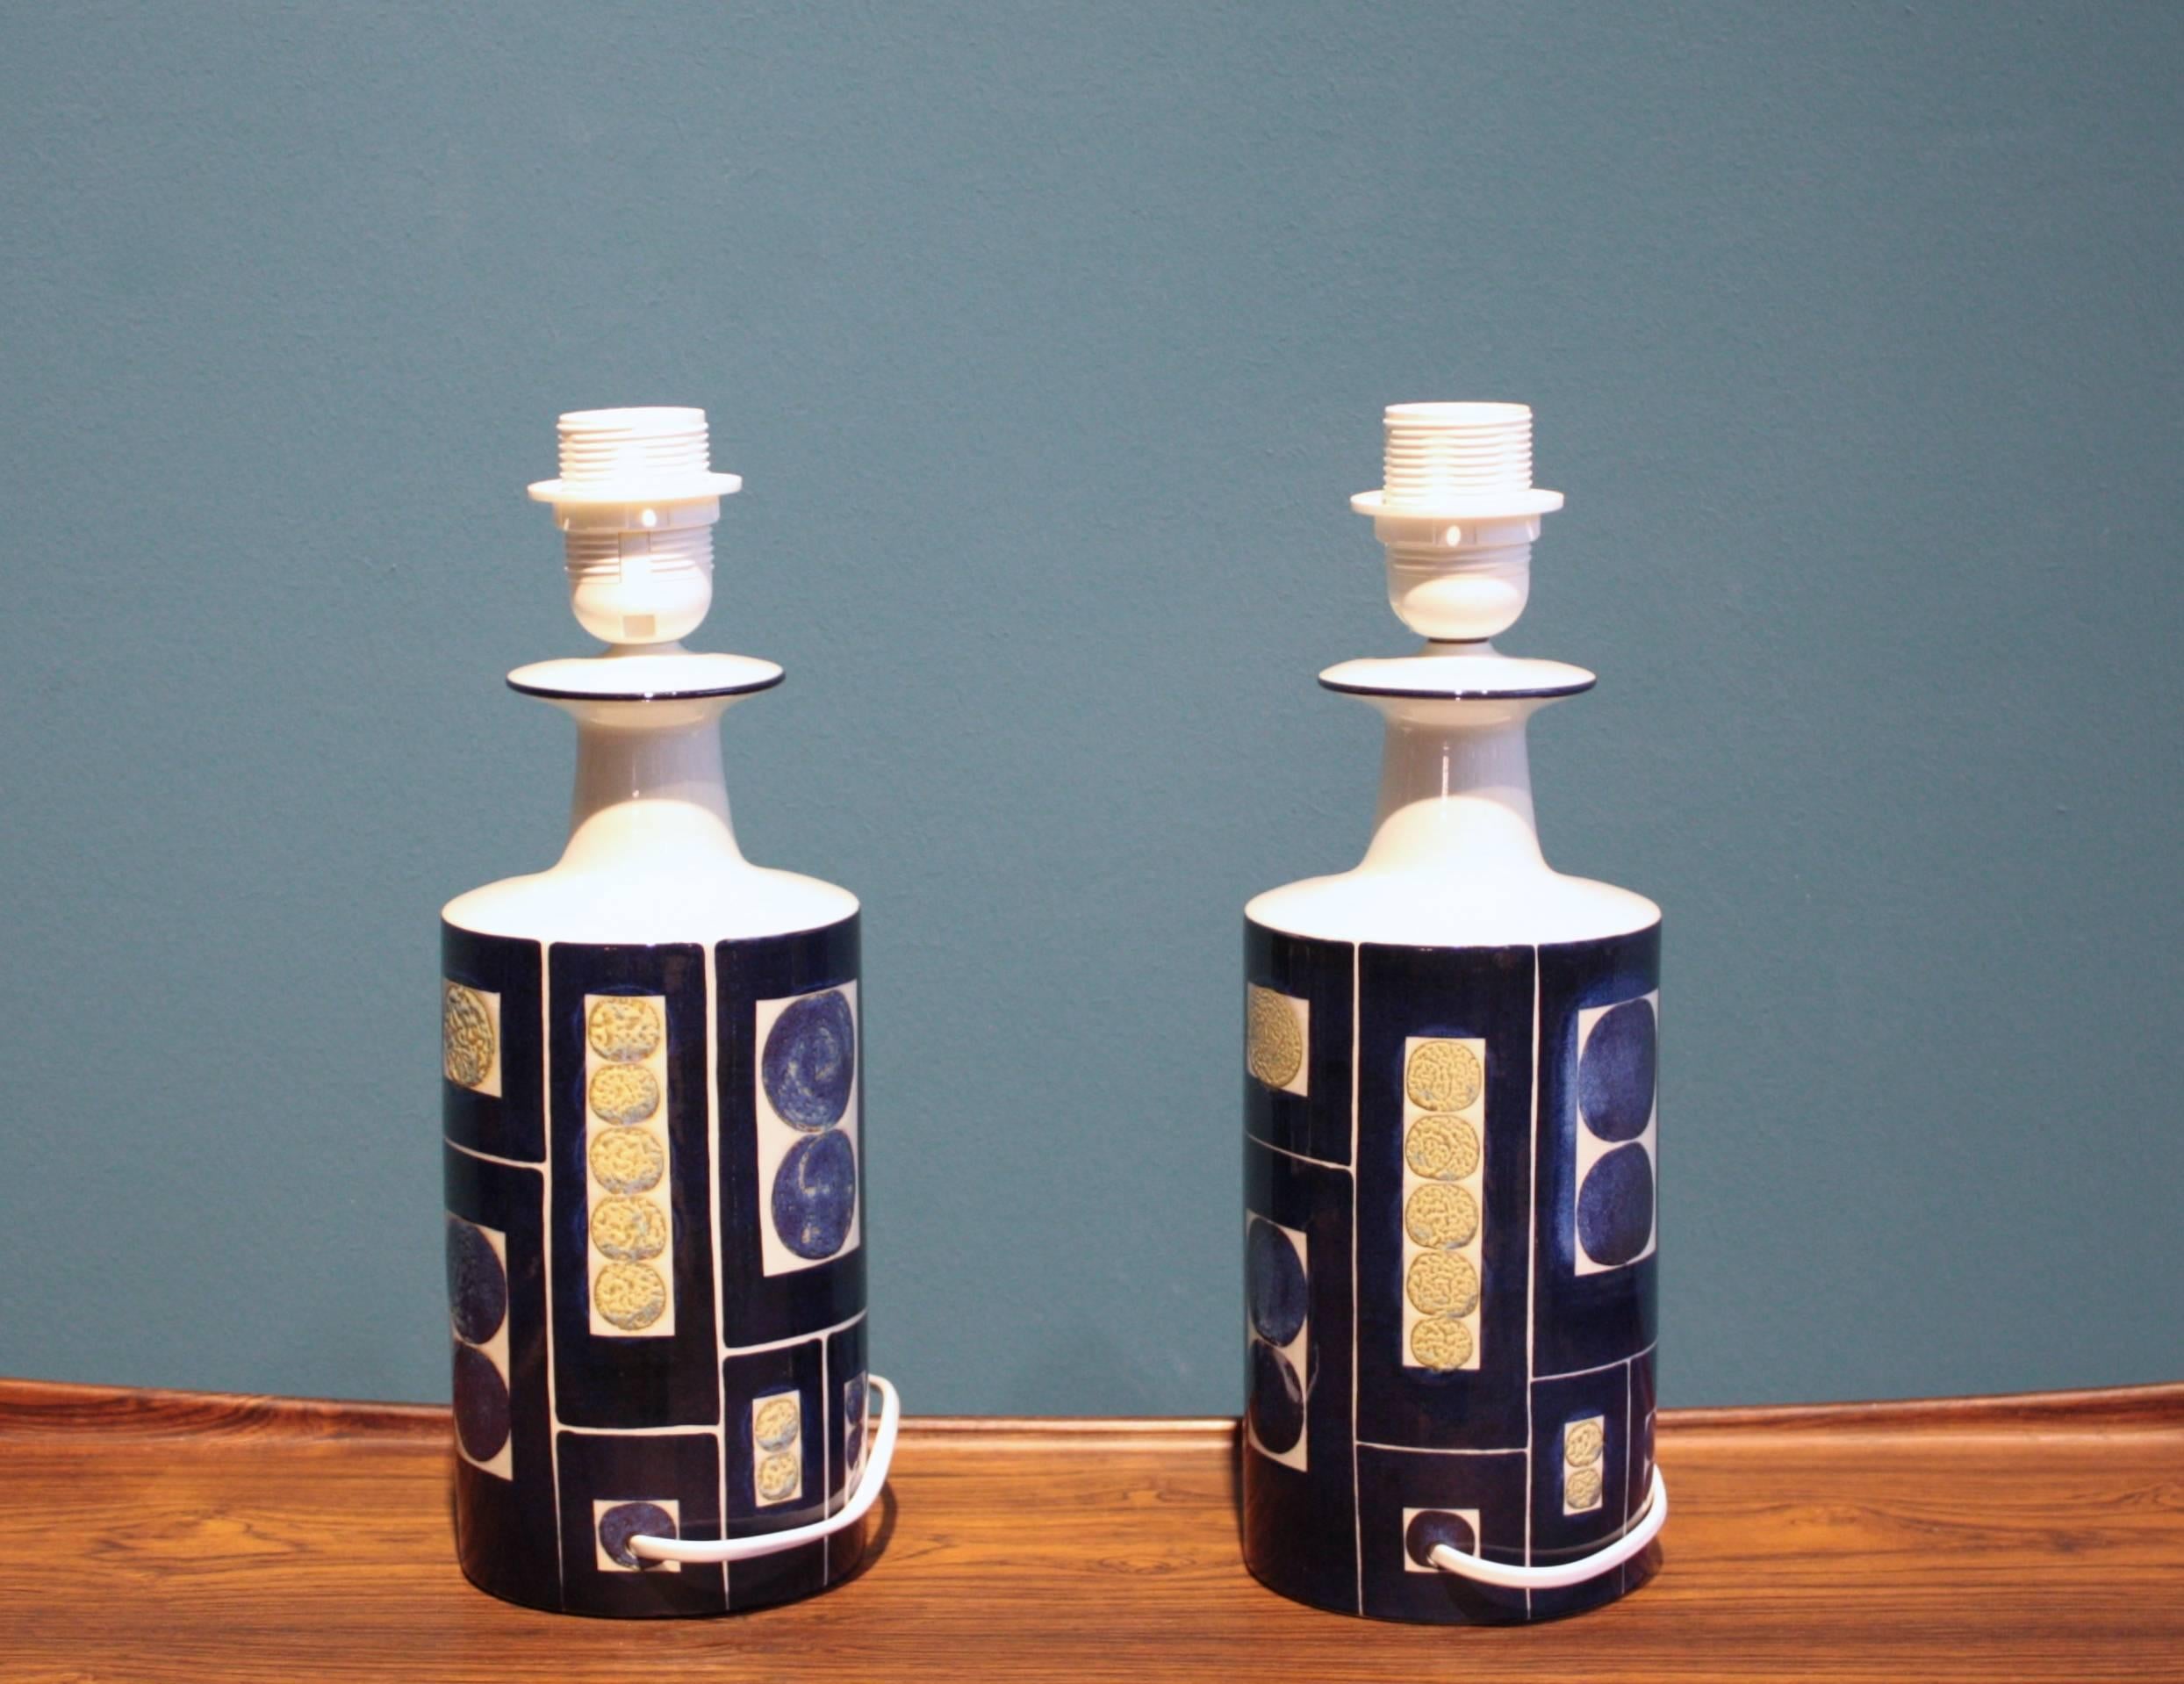 20th Century Pair of Royal 9 Tenera Table Lamps by Inge-Lise Kofoed for Fog & Mørup, 1967